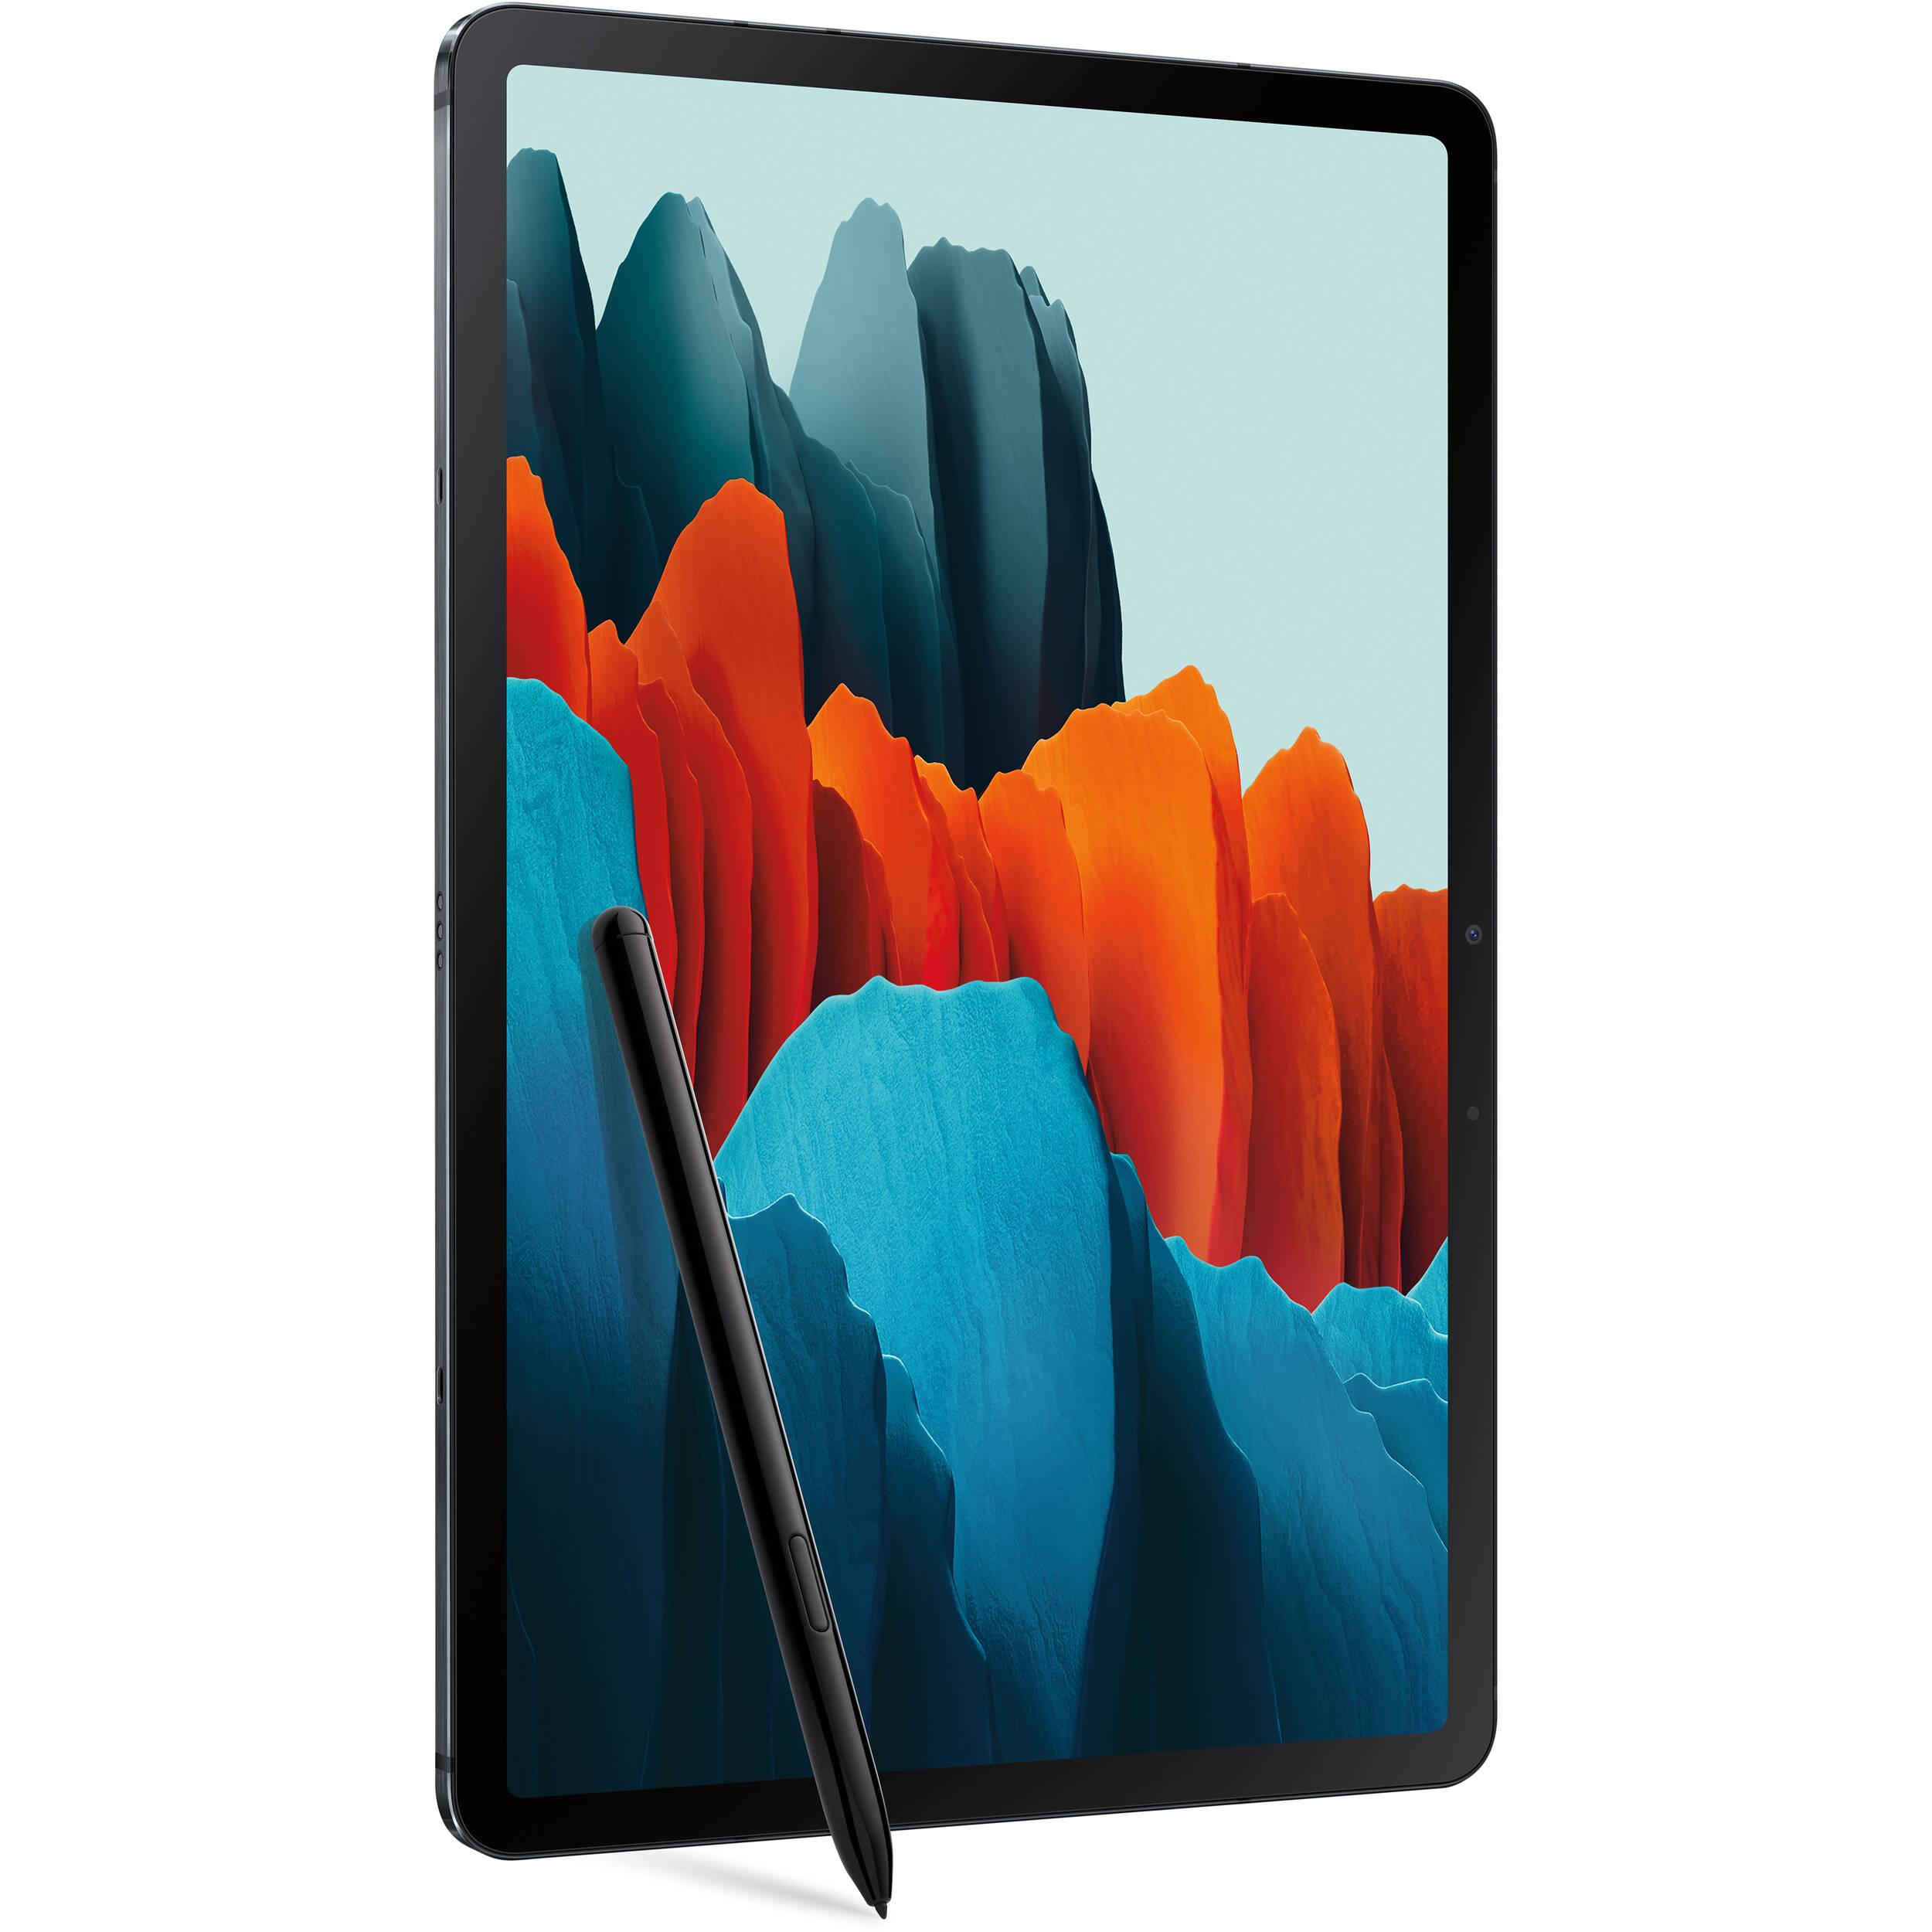 Samsung Galaxy Tab S7+ 128GB 12.4in Tablet for $407.99 Shipped